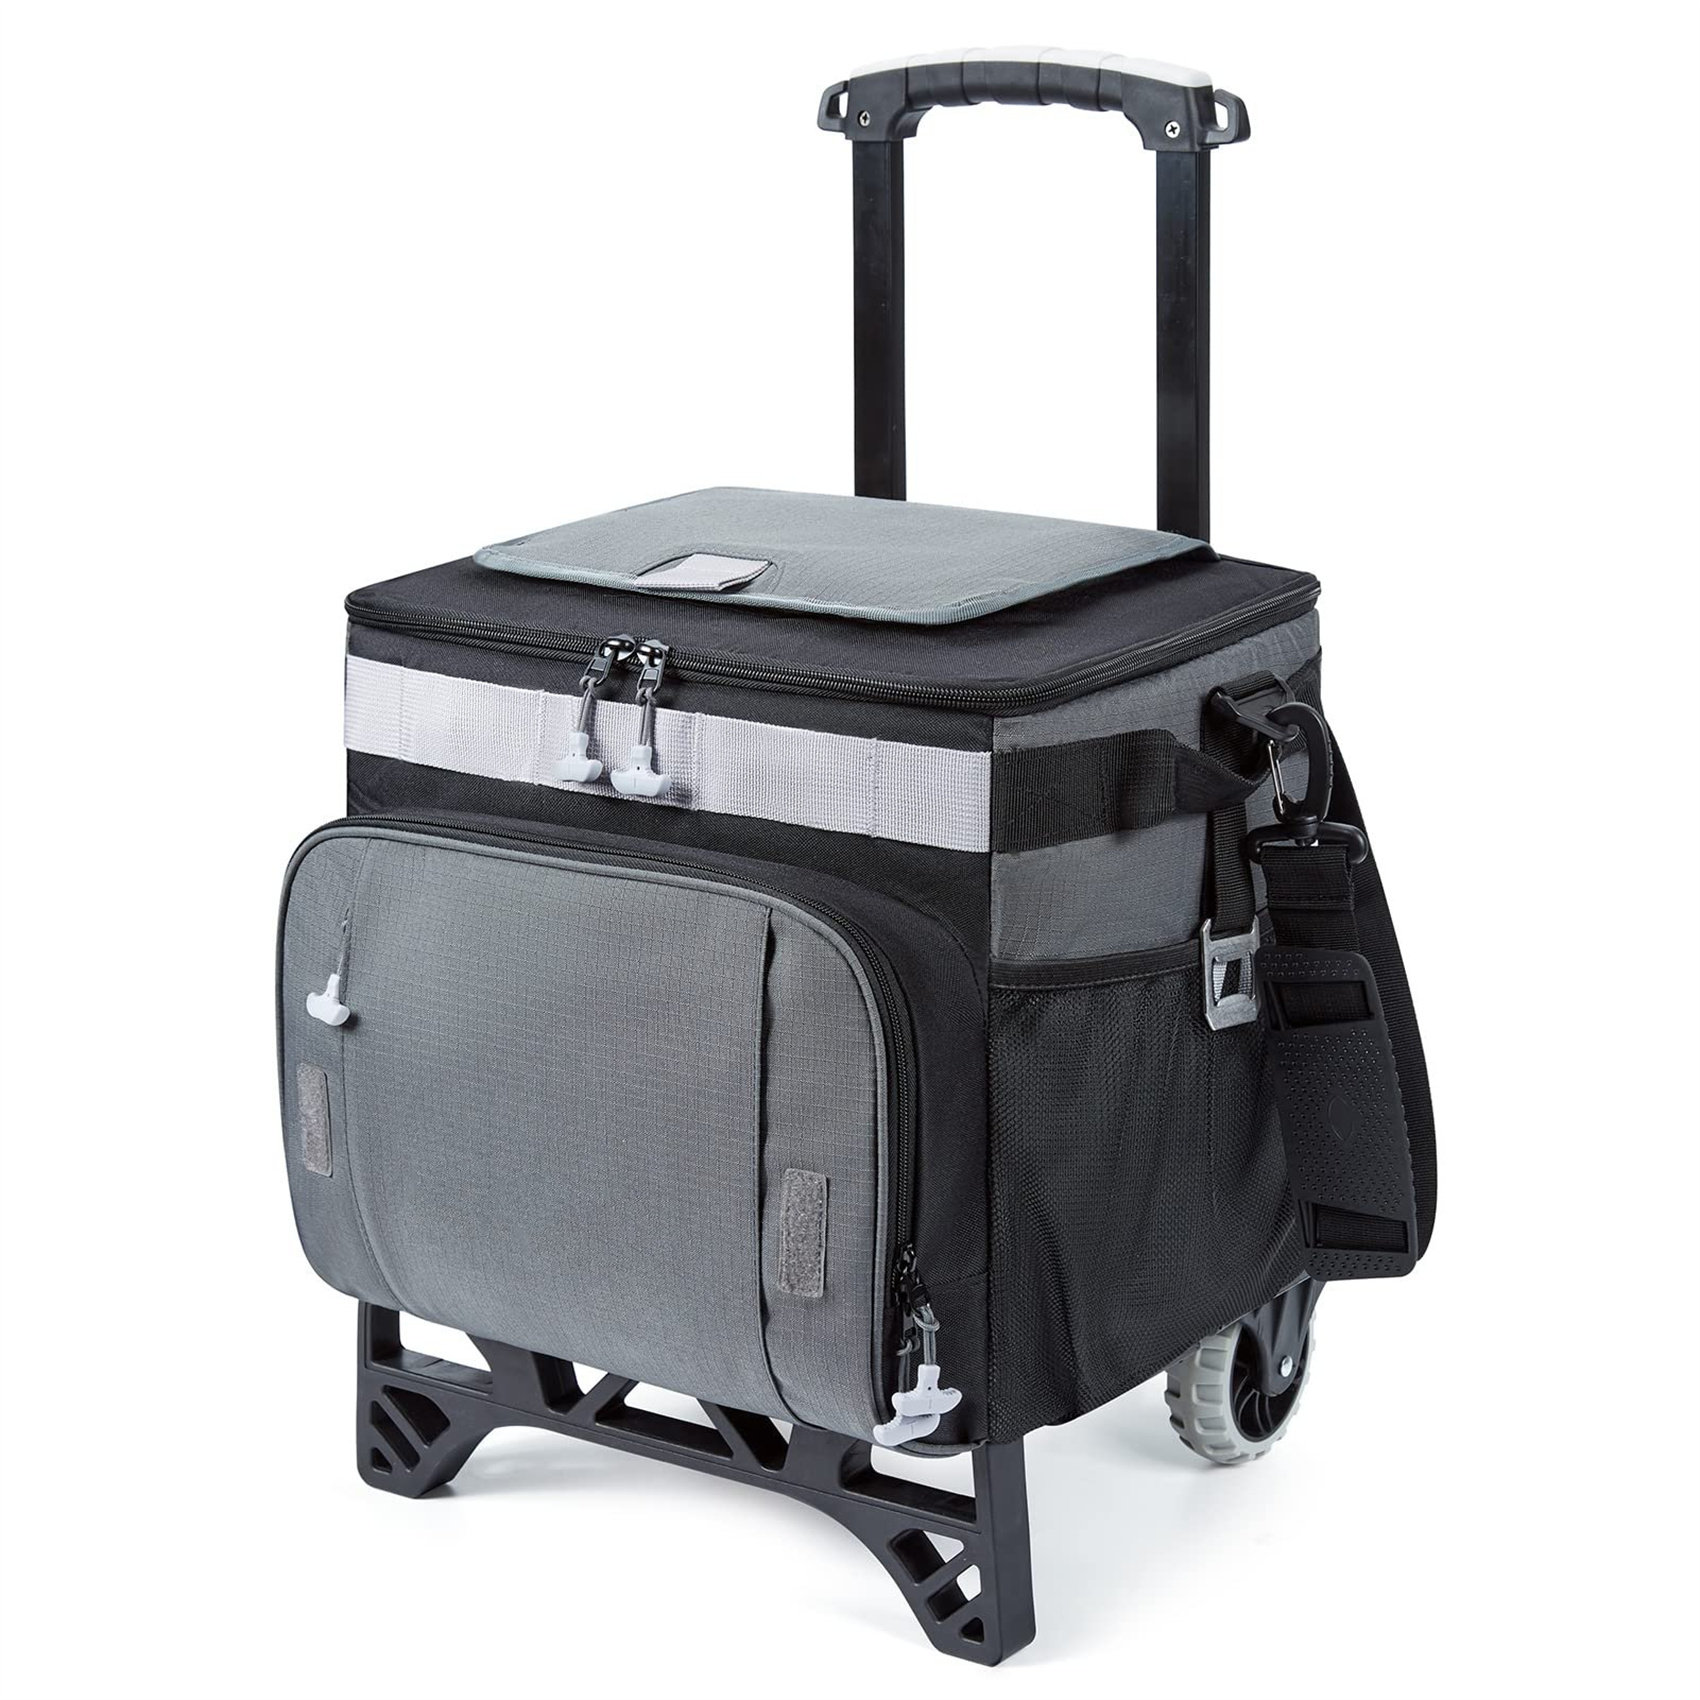 Portable Rolling Cooler – PICNIC TIME FAMILY OF BRANDS